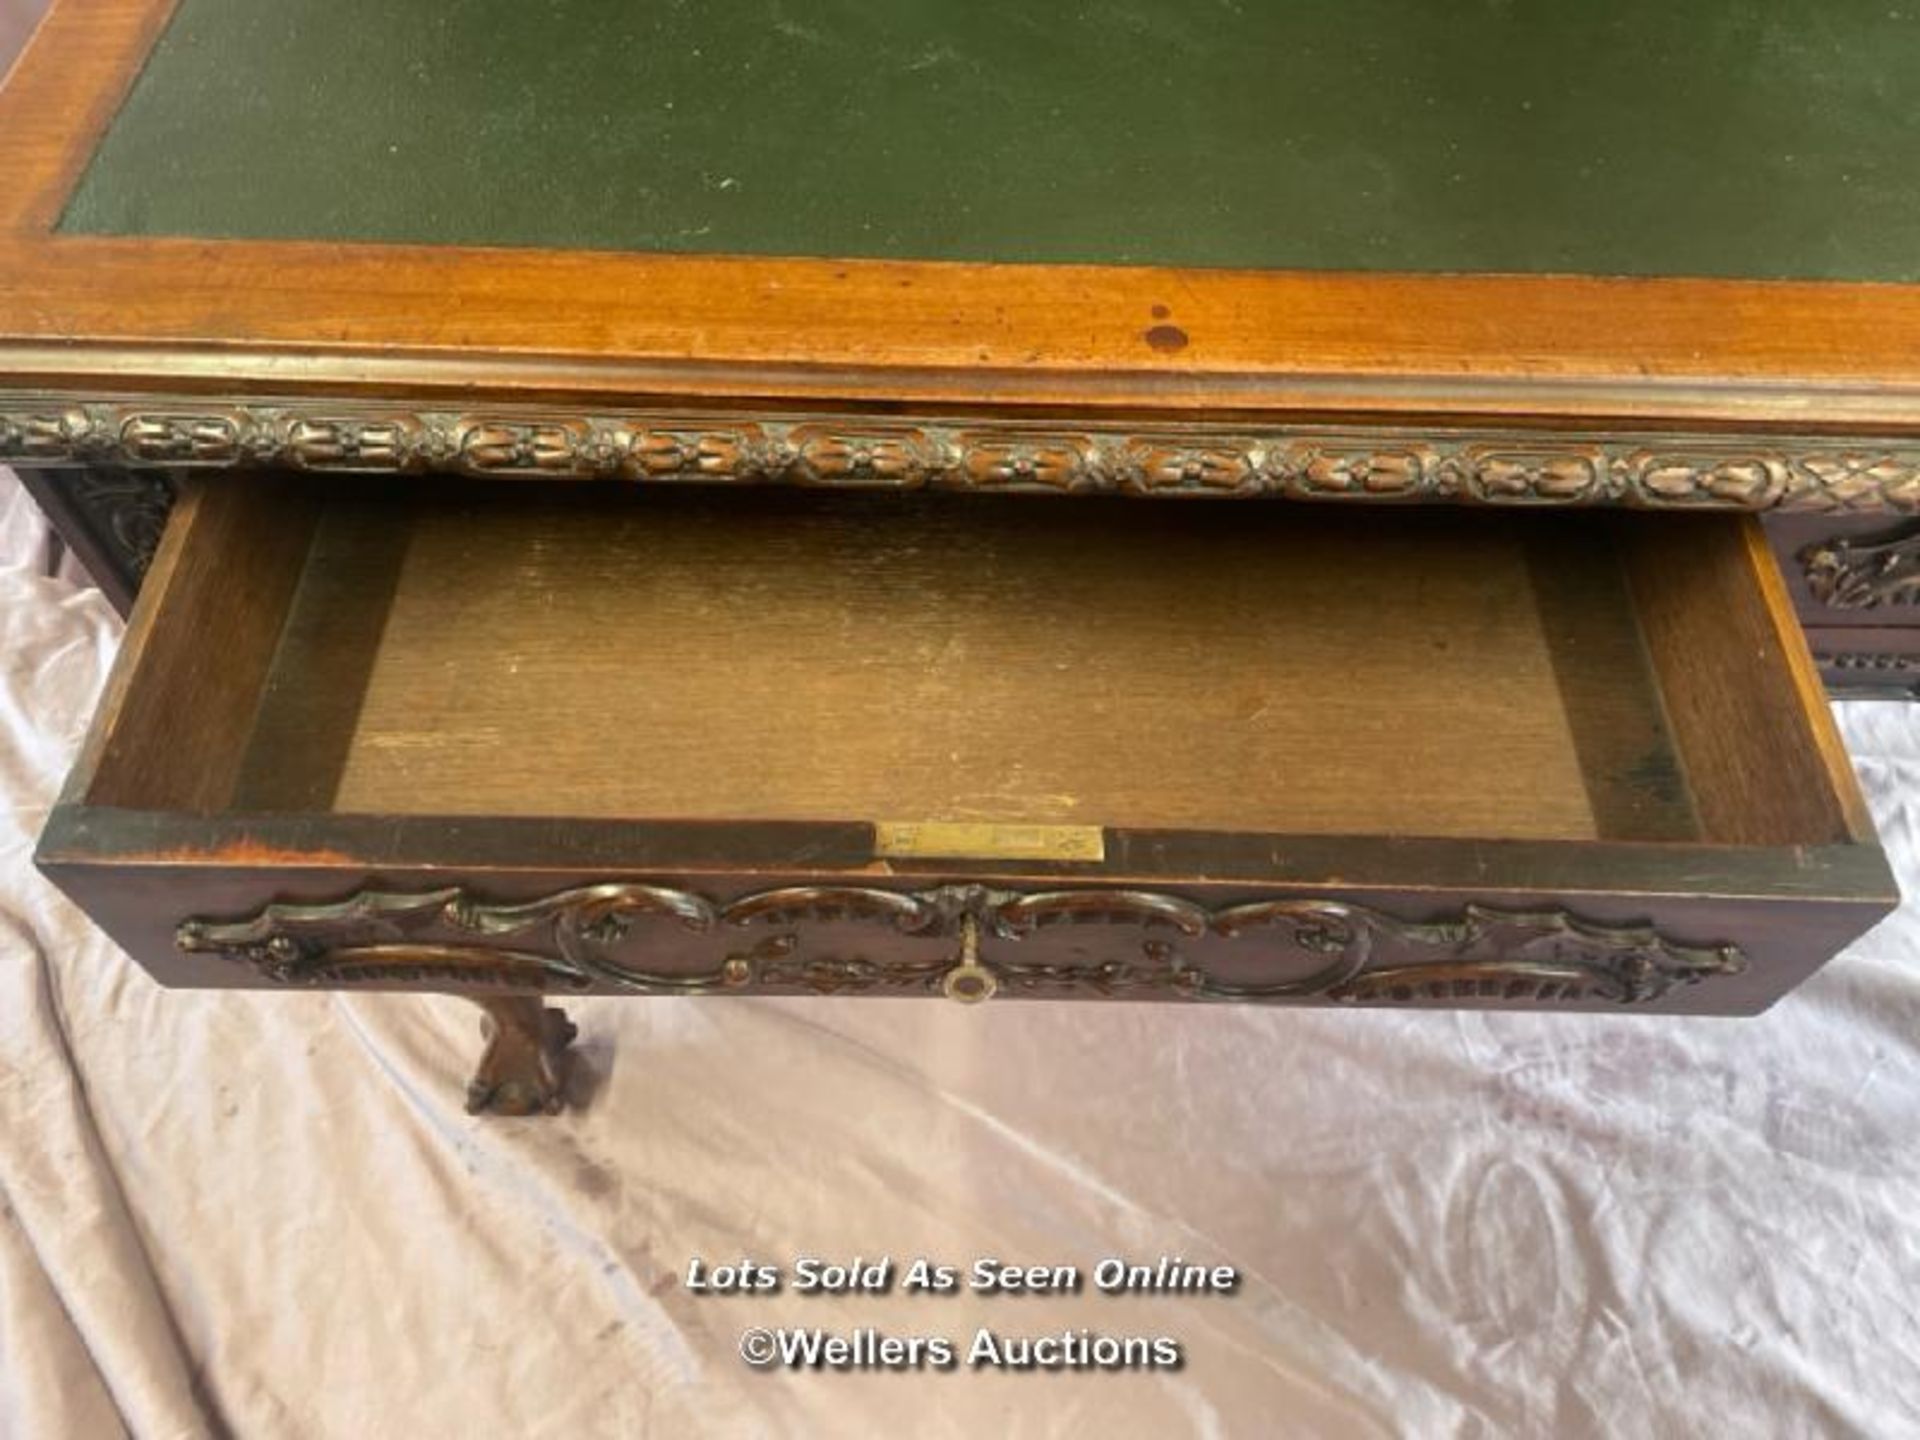 CIRCA 1900, GEOGIAN STYLE HIGHLY DECORATIVE AND CARVED MAHOGANY LINED WRITING DESK WITH LEATHER - Image 5 of 11